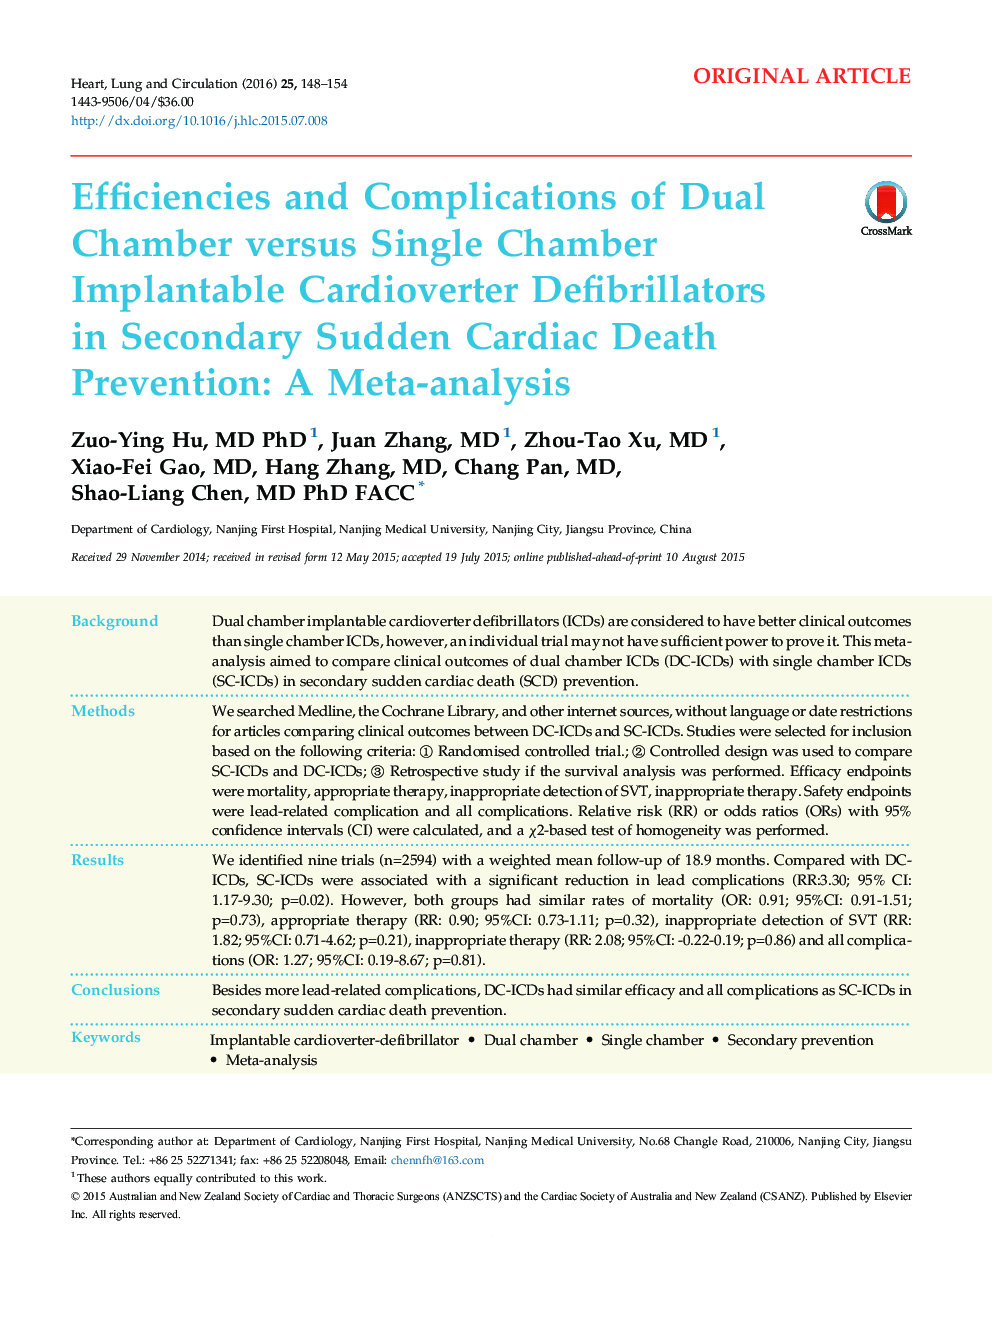 Efficiencies and Complications of Dual Chamber versus Single Chamber Implantable Cardioverter Defibrillators in Secondary Sudden Cardiac Death Prevention: A Meta-analysis